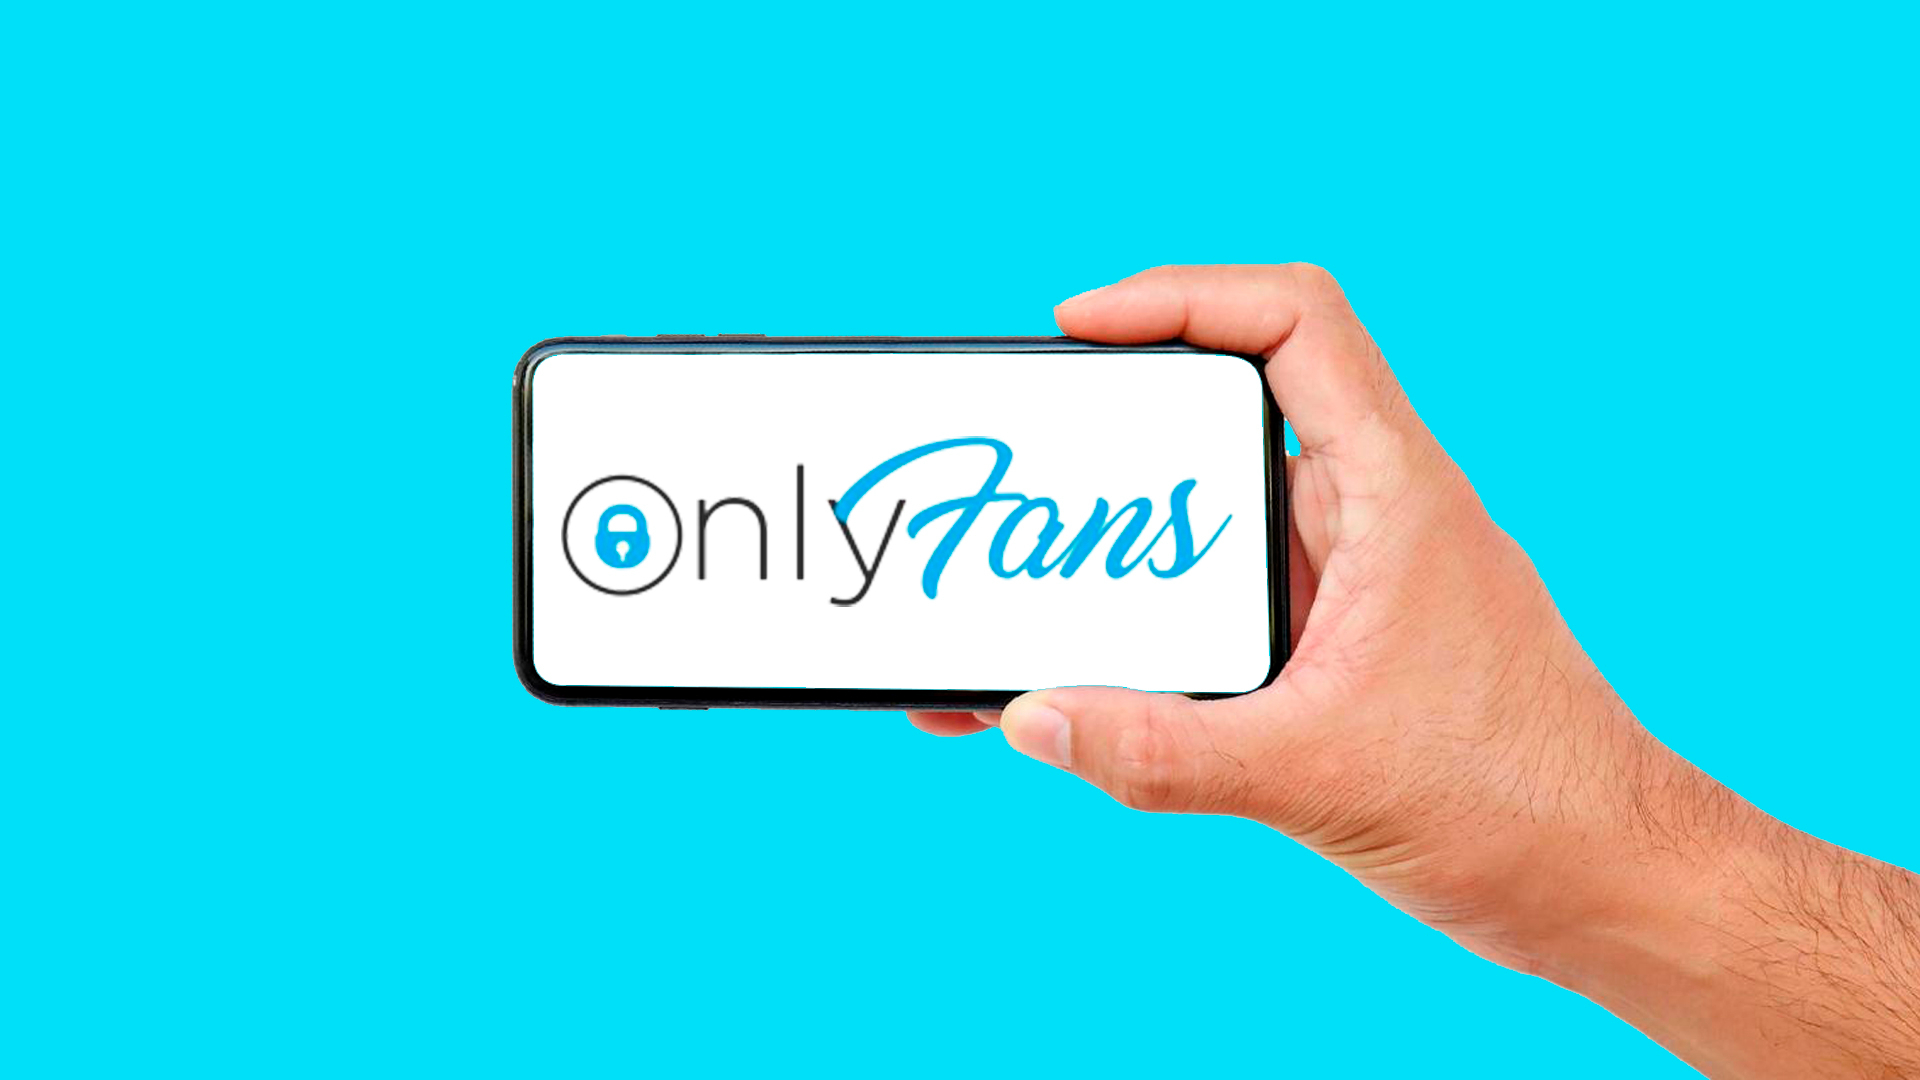 iFlash4u – As Seen On Onlyfans